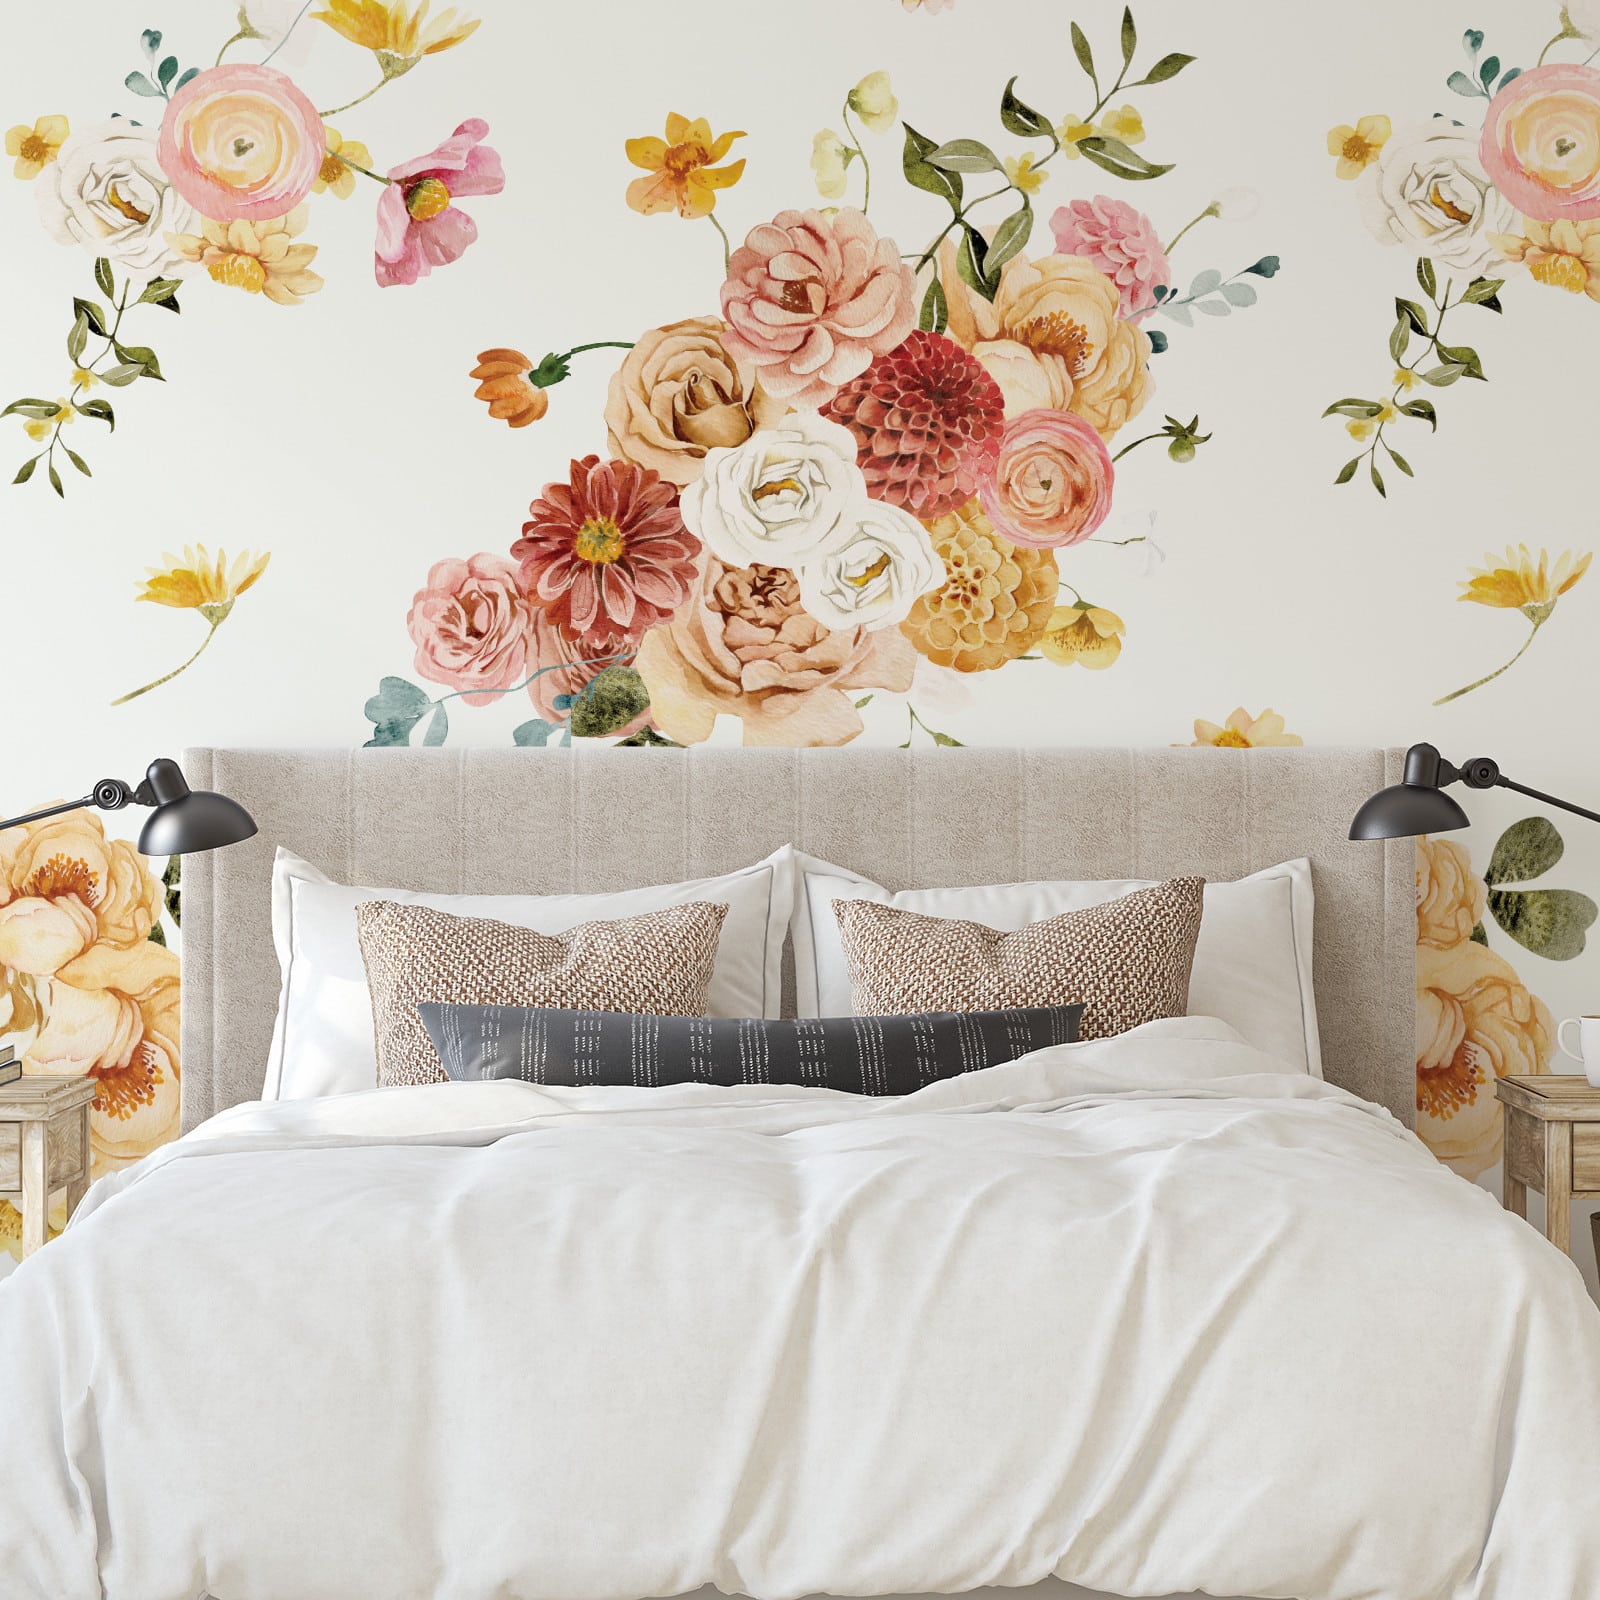 Learn How to Pick the Perfect Floral Wallpaper for Your Space